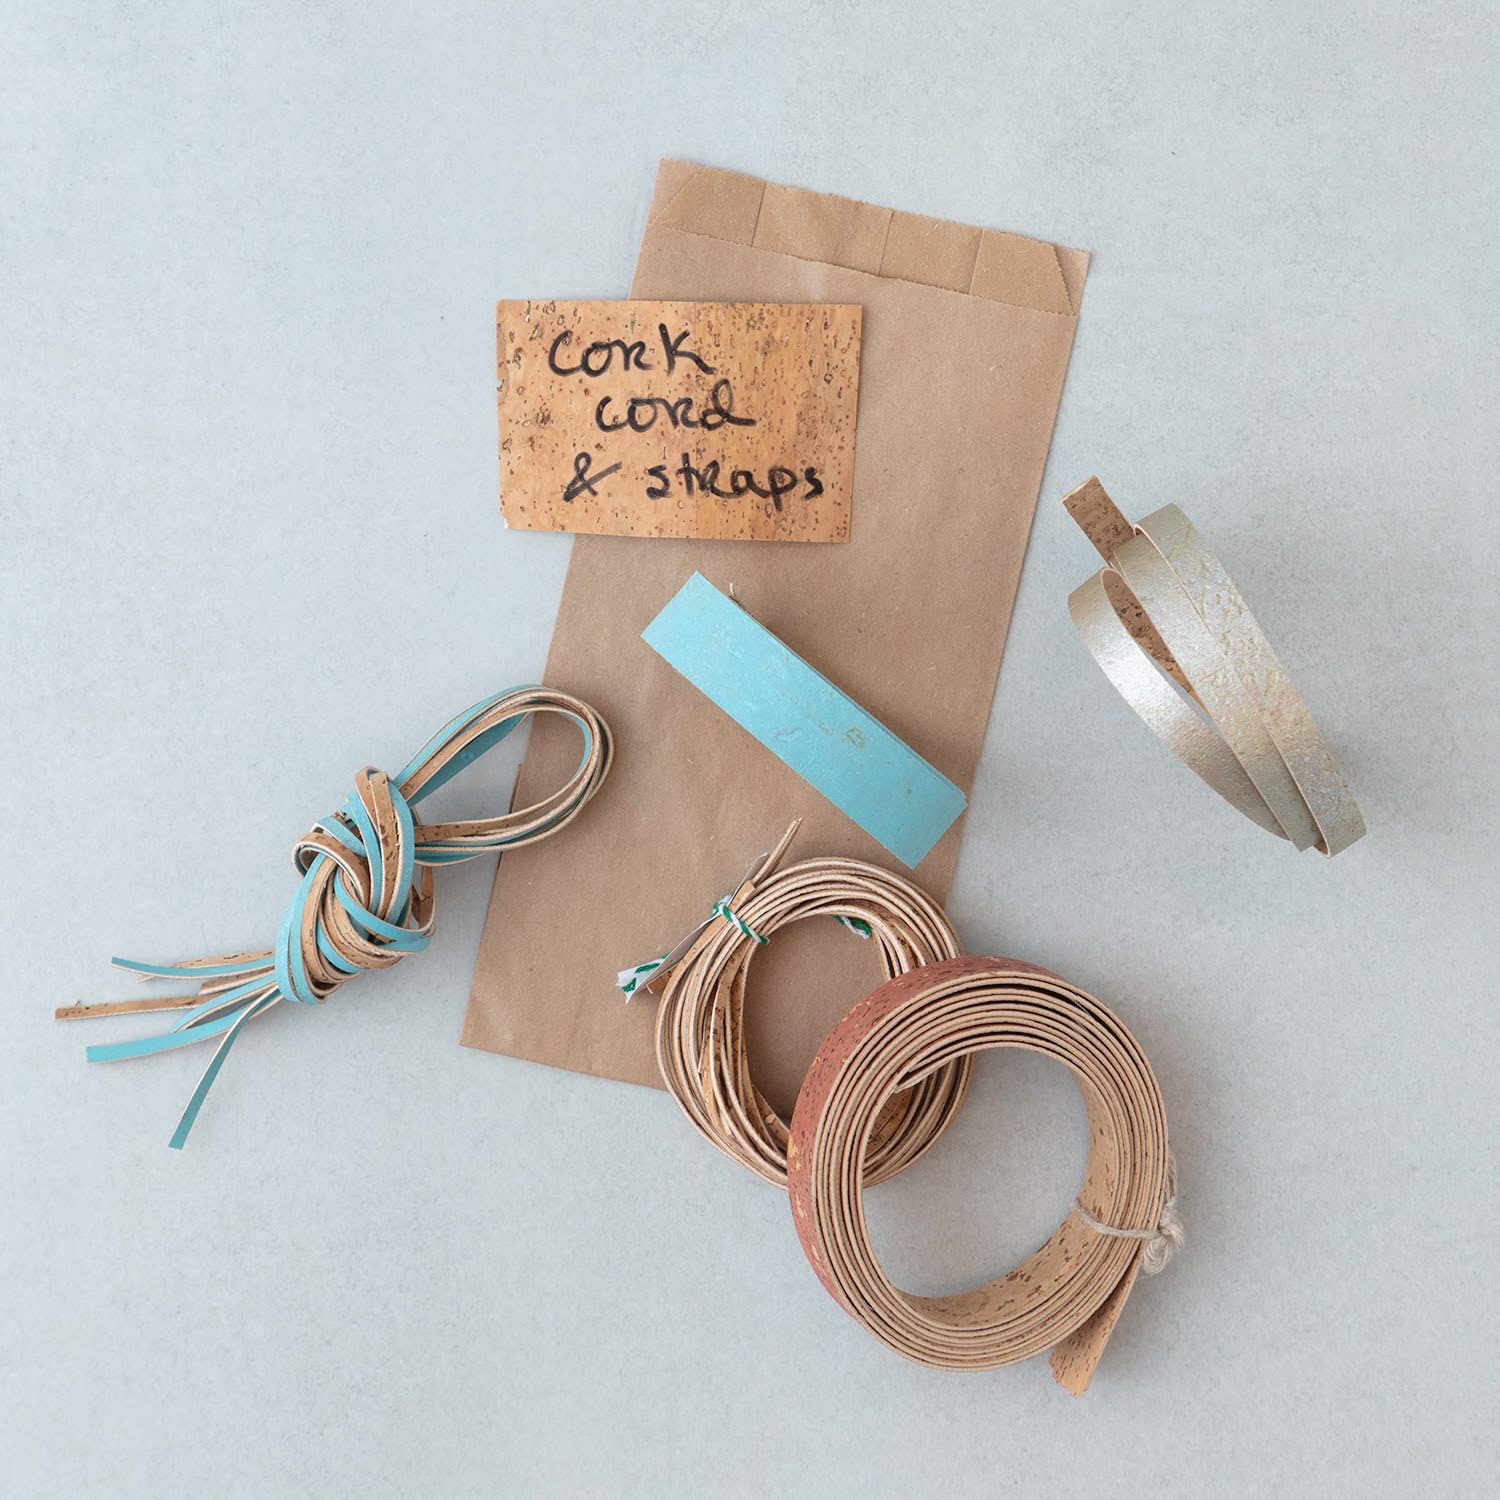 Flat Cork Cord and Straps